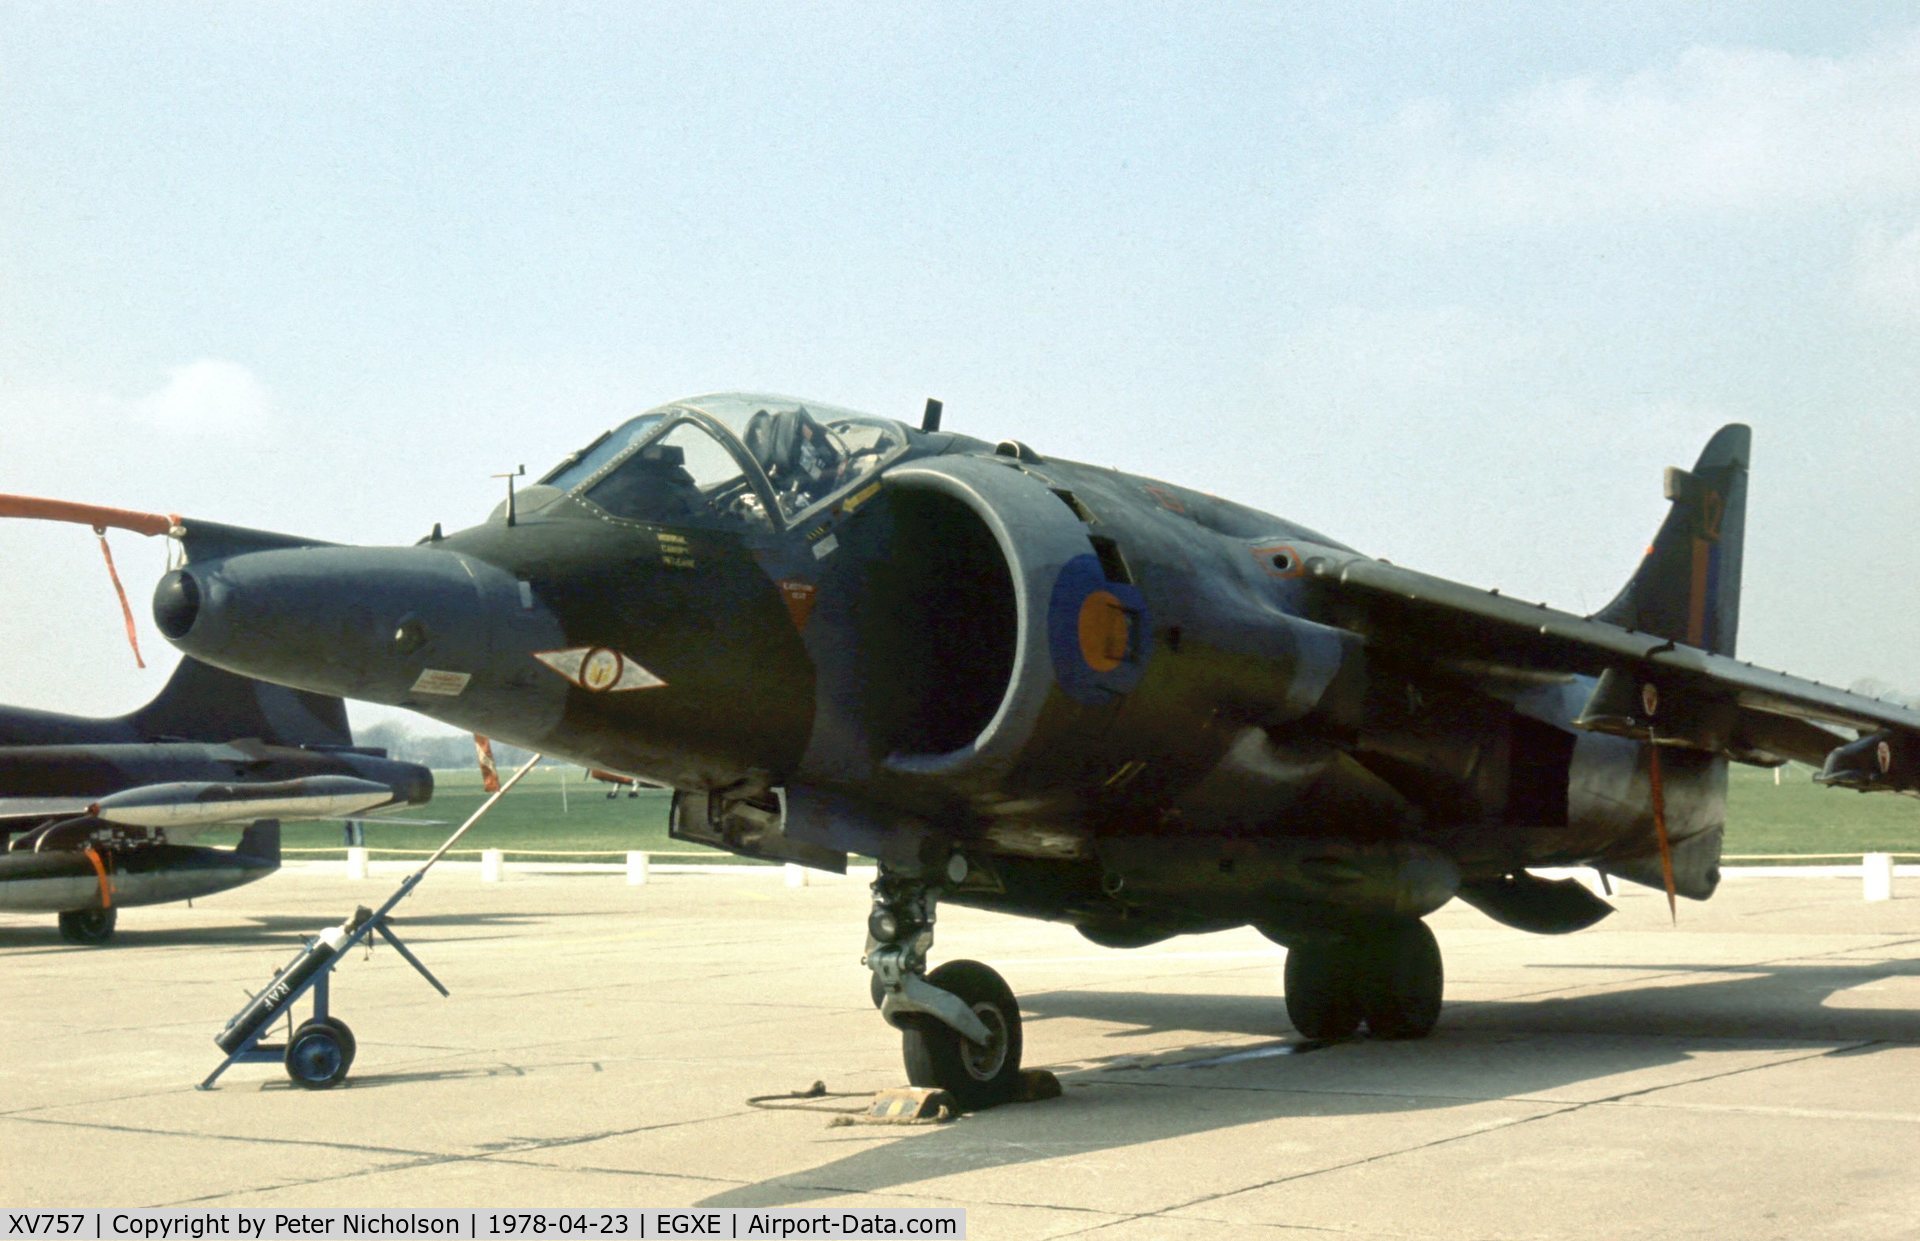 XV757, 1969 Hawker Siddeley Harrier GR.3 C/N 712020, Another view of the 1 Squadron Harrier GR.3 on display at the 1978 Leeming Open Day.